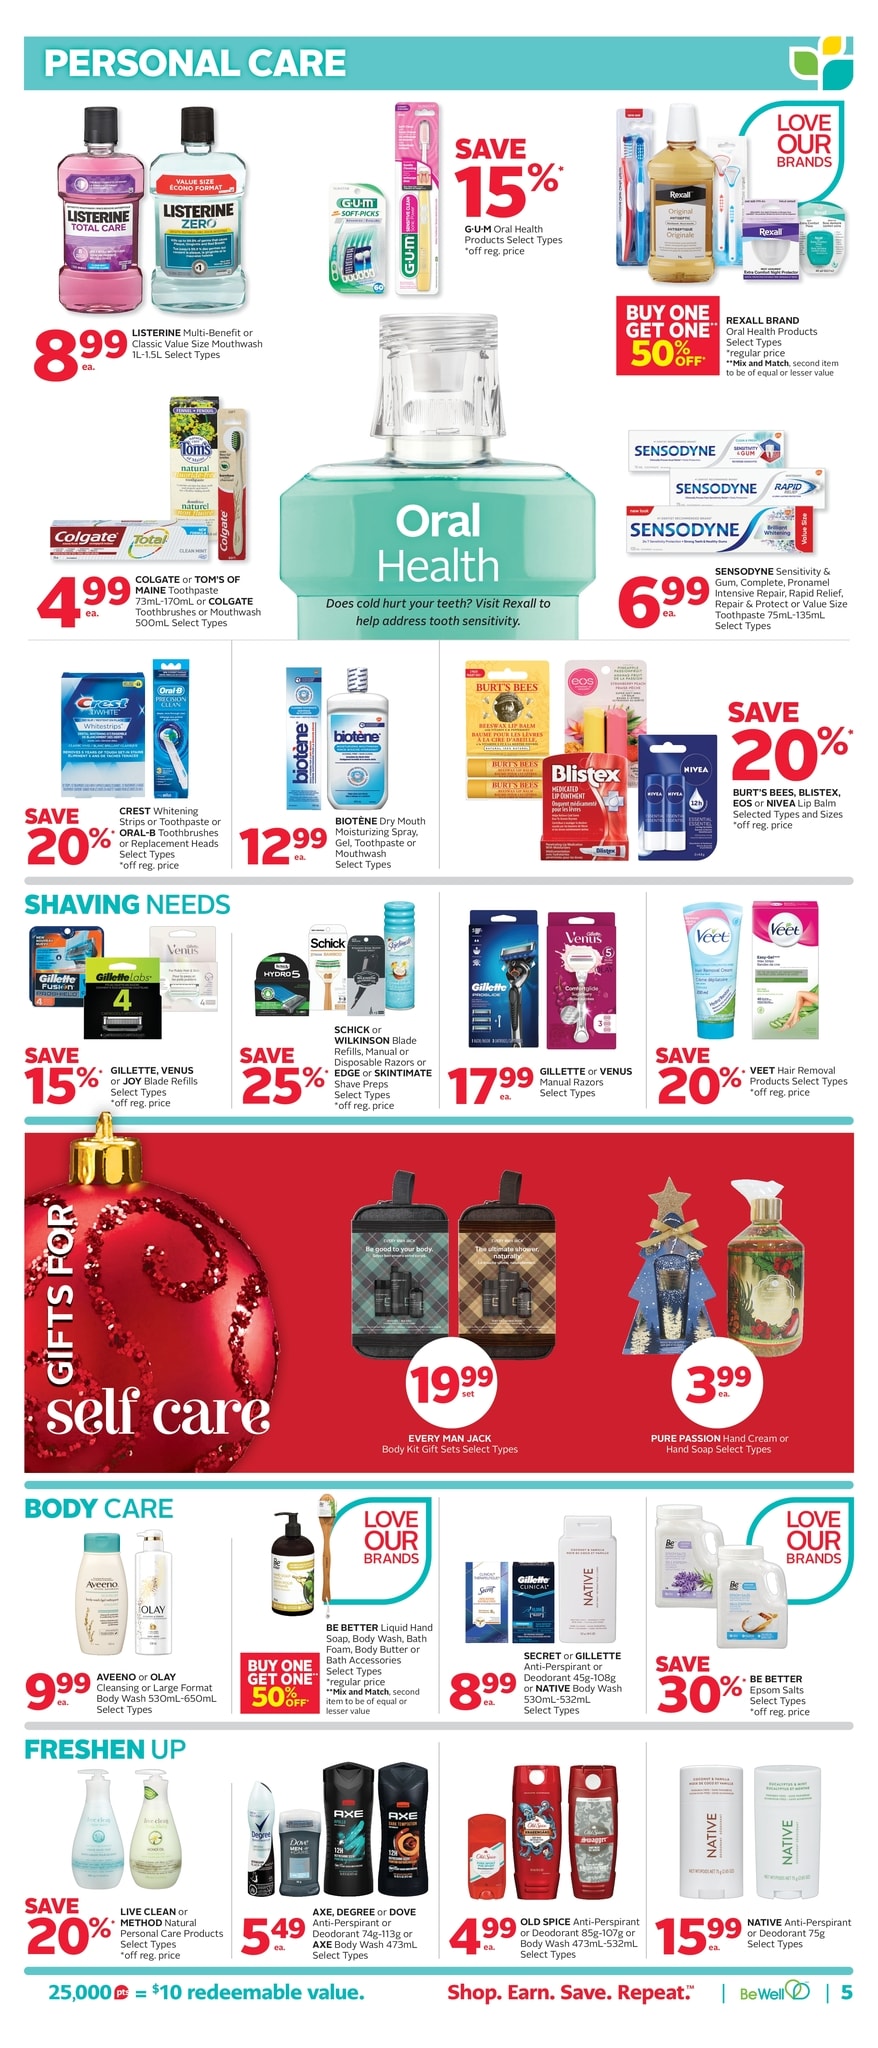 Rexall - Weekly Flyer Specials - Black Friday Deals - Page 10